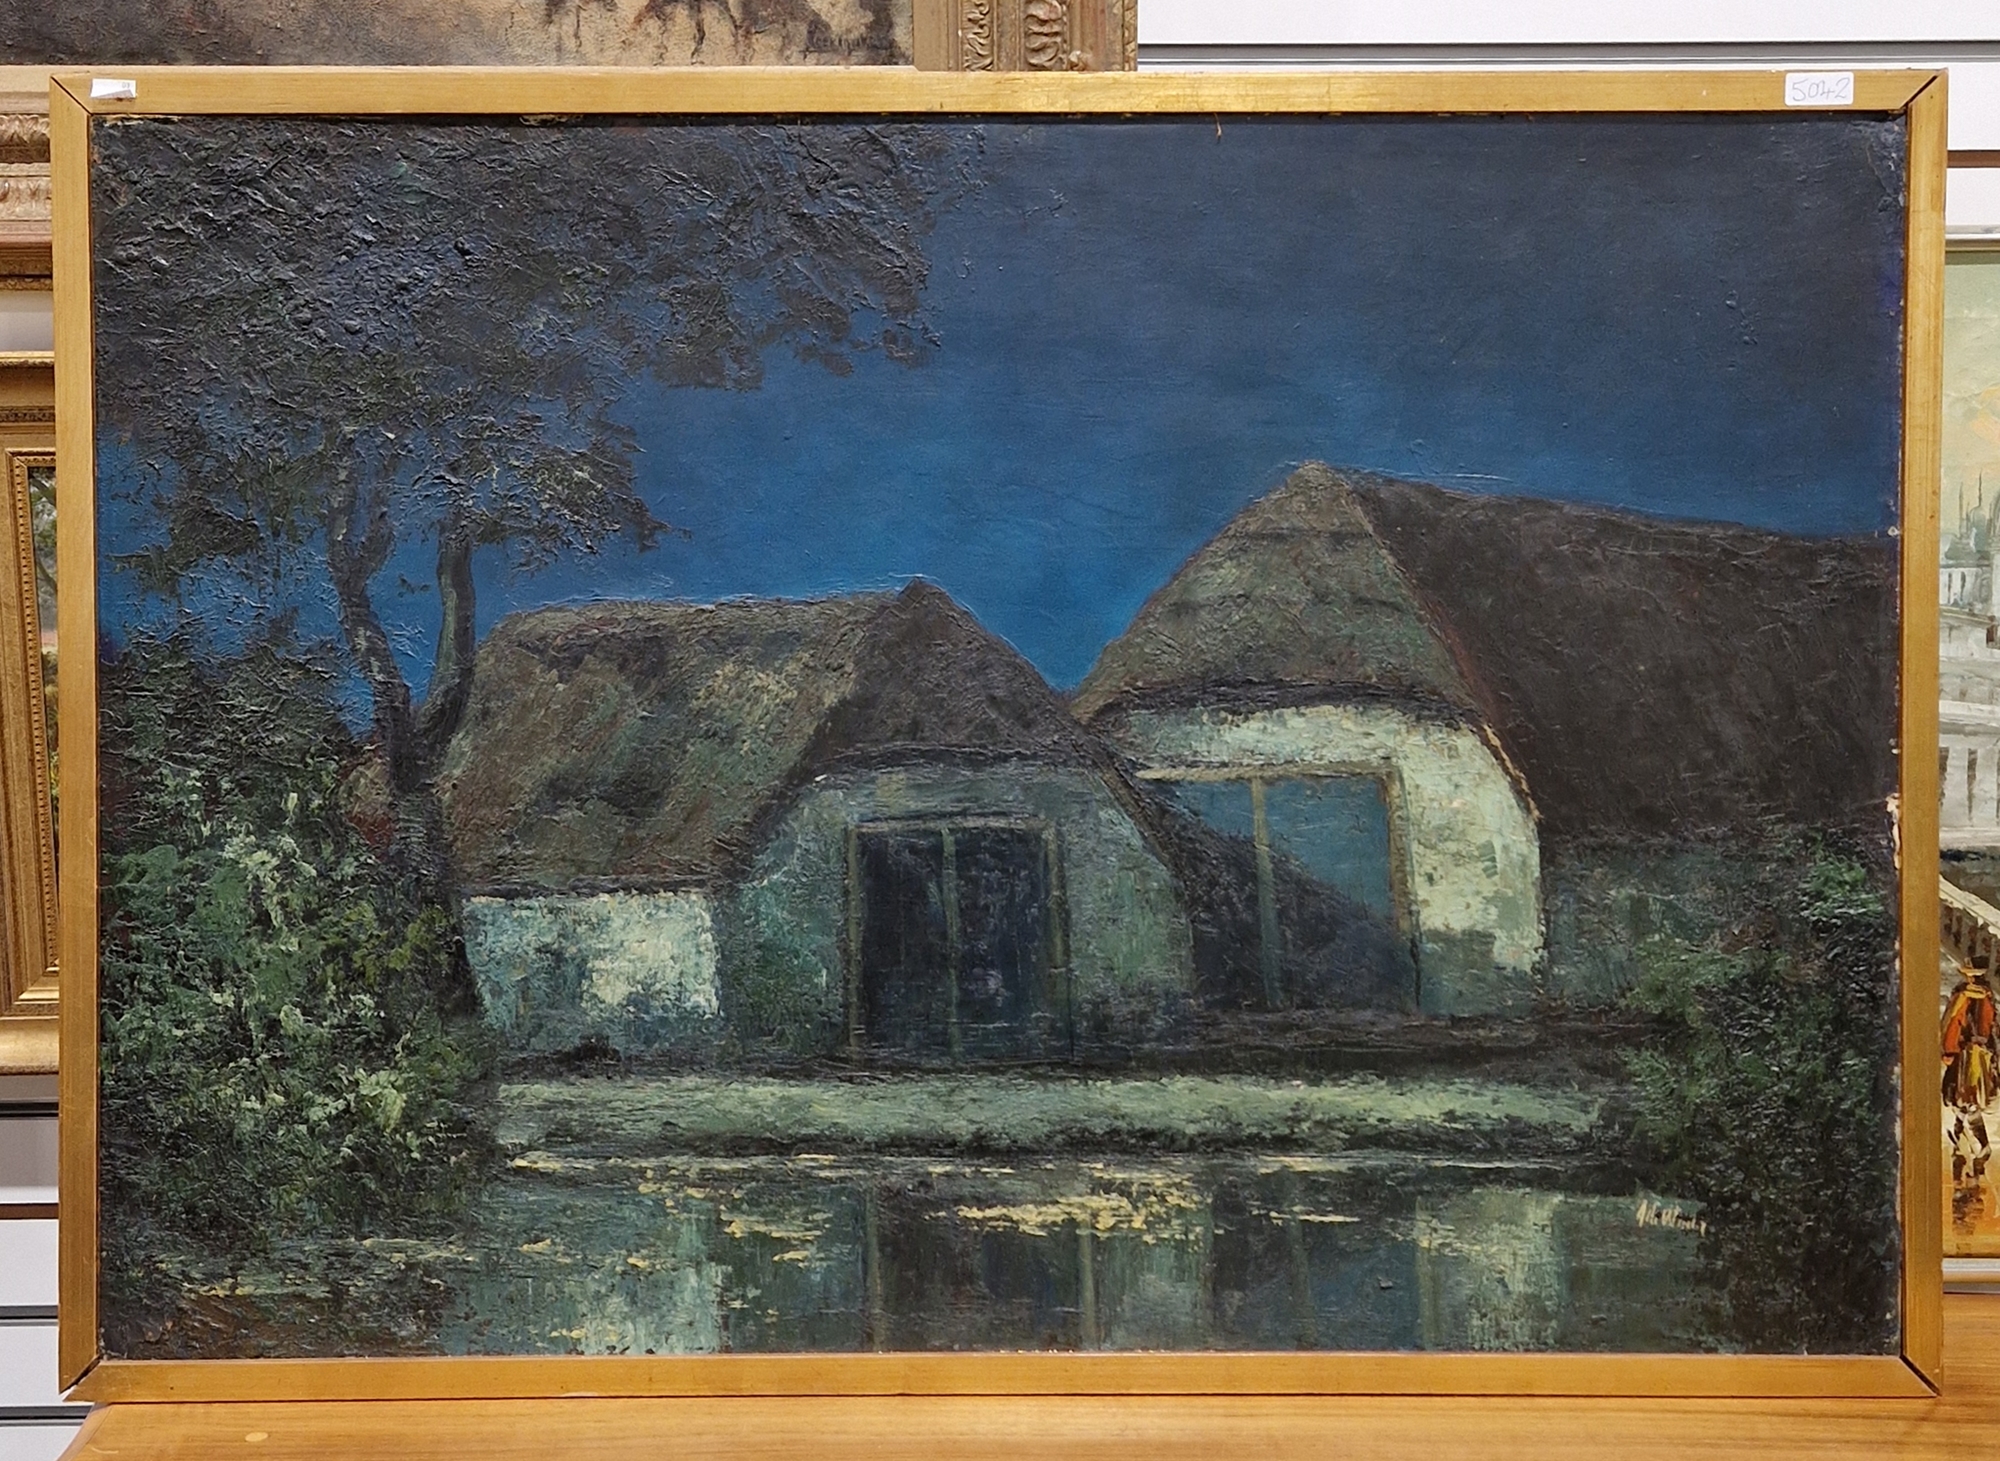 Alli Wintry/Utintry? (20th century) Oil on board Moonlit scene of two thatched barns beside a - Image 5 of 6